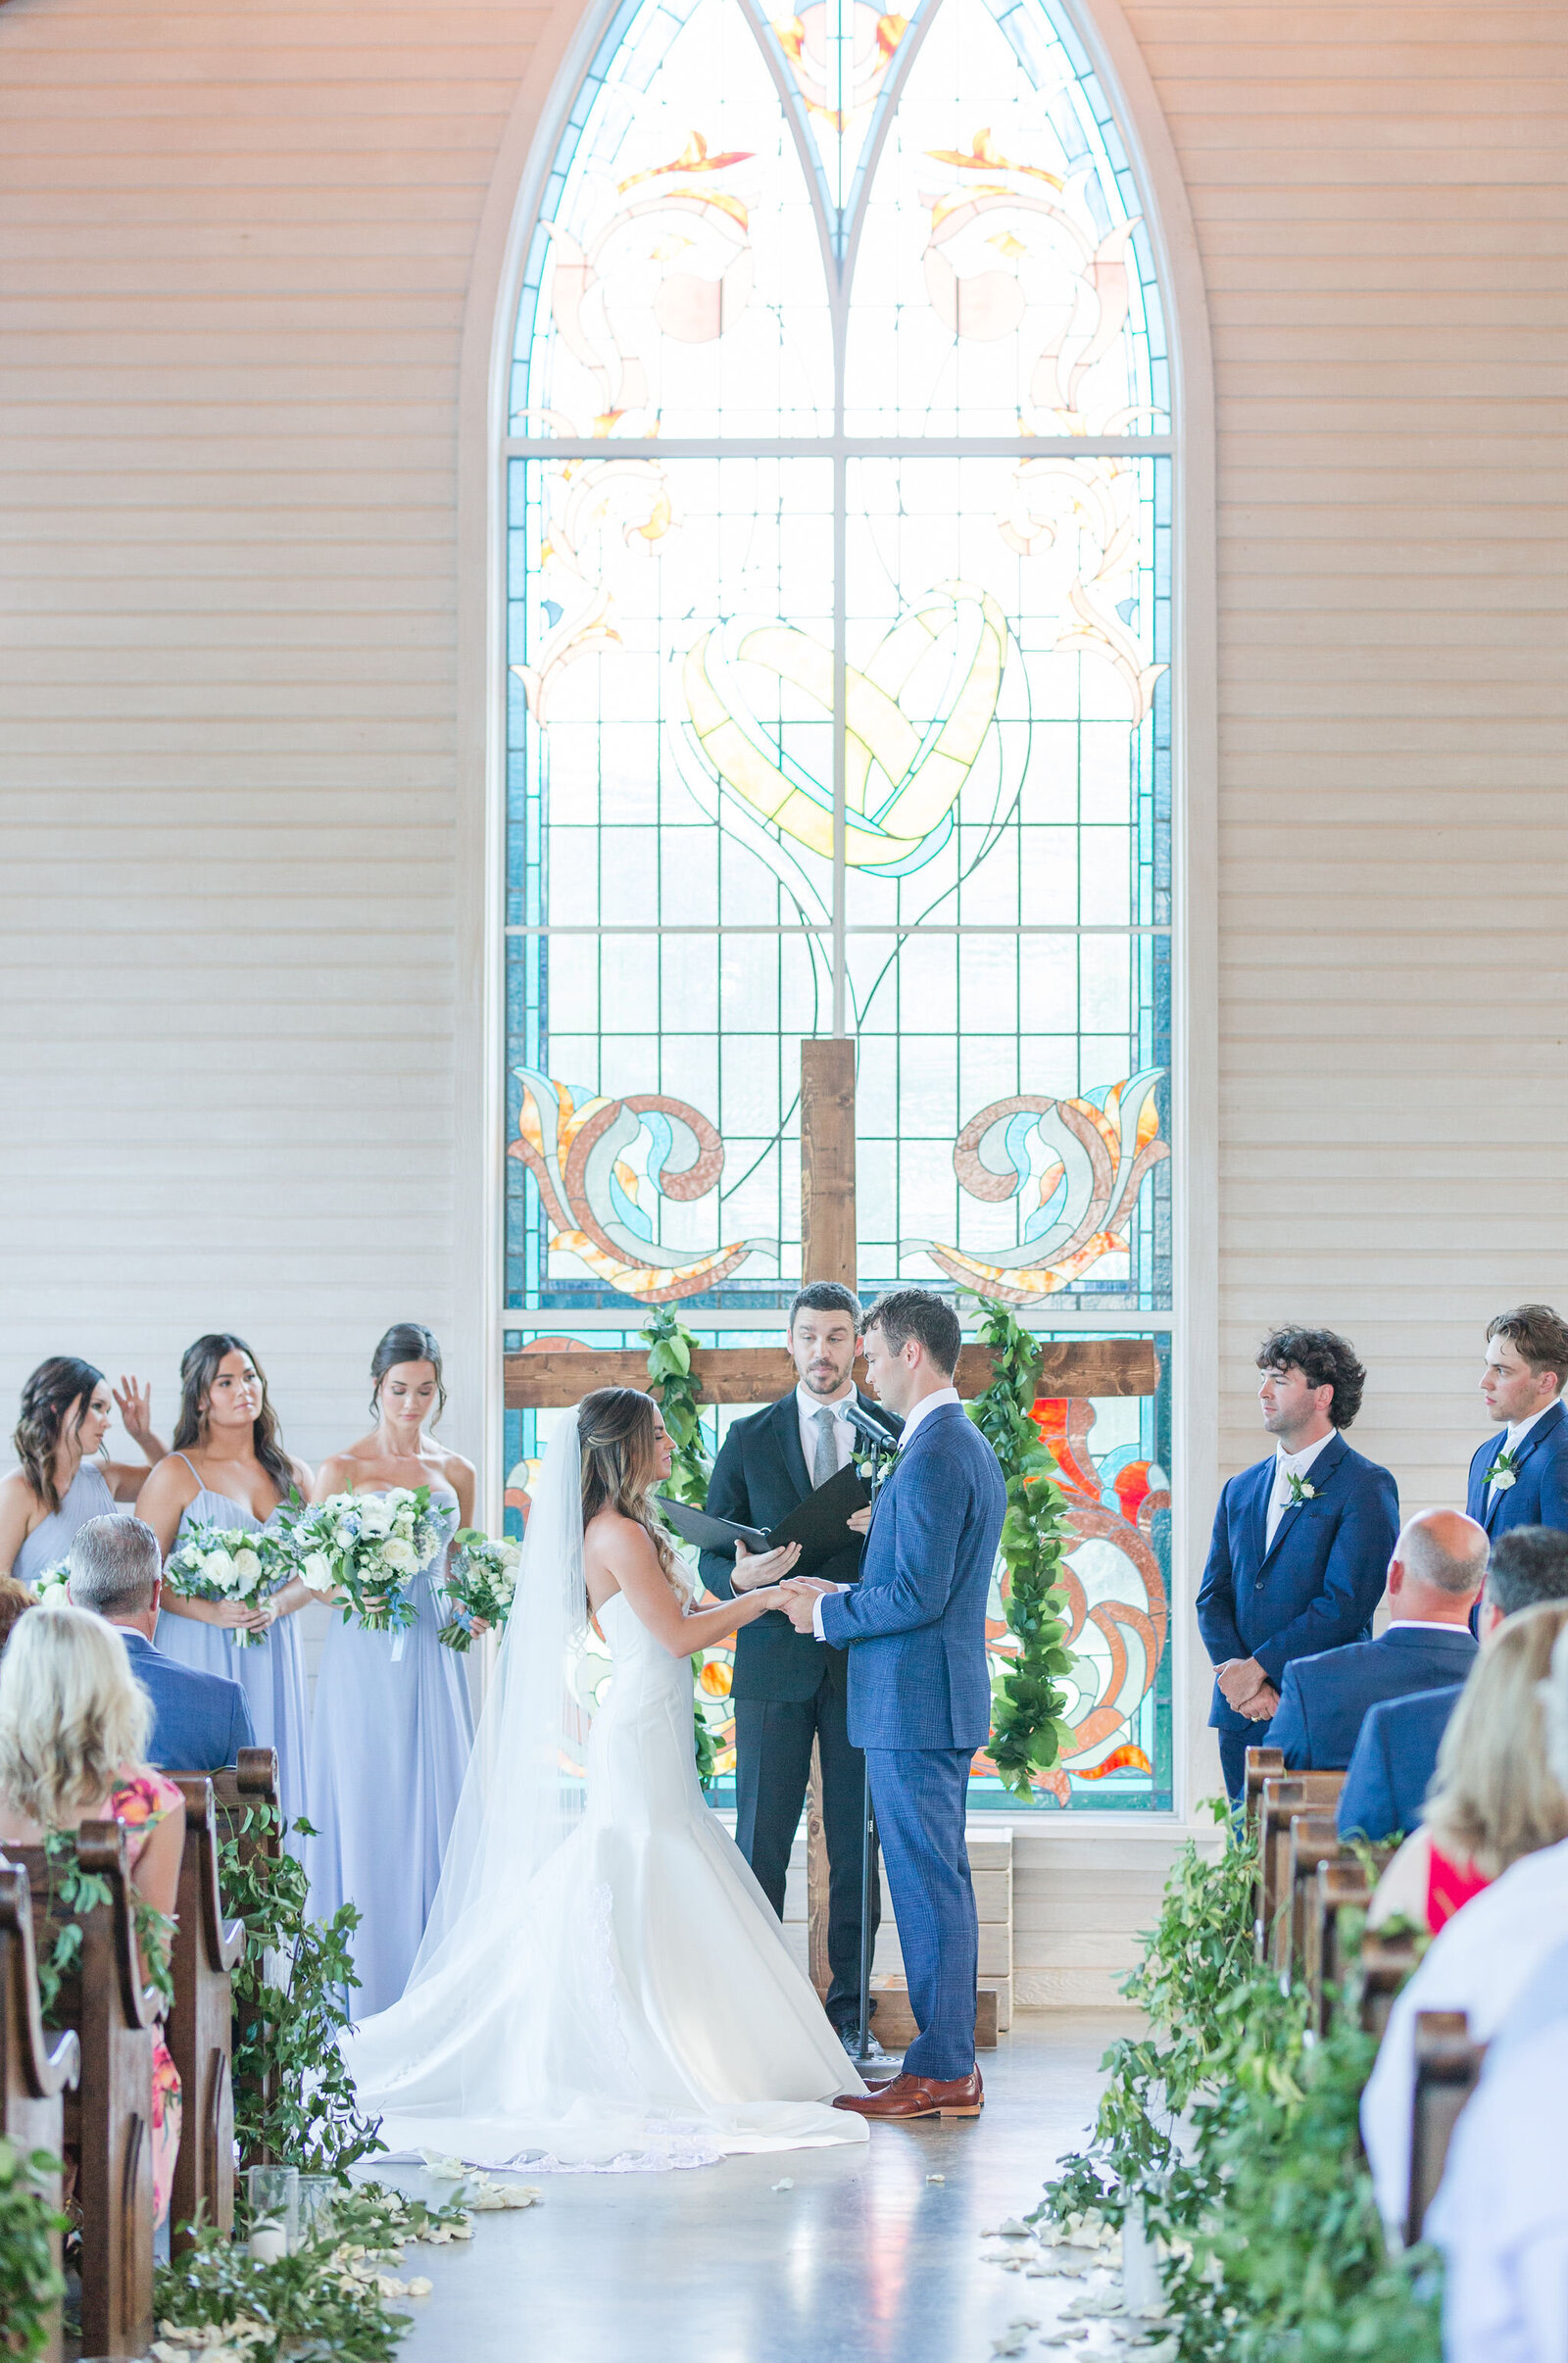 wedding ceremony in stained glass church